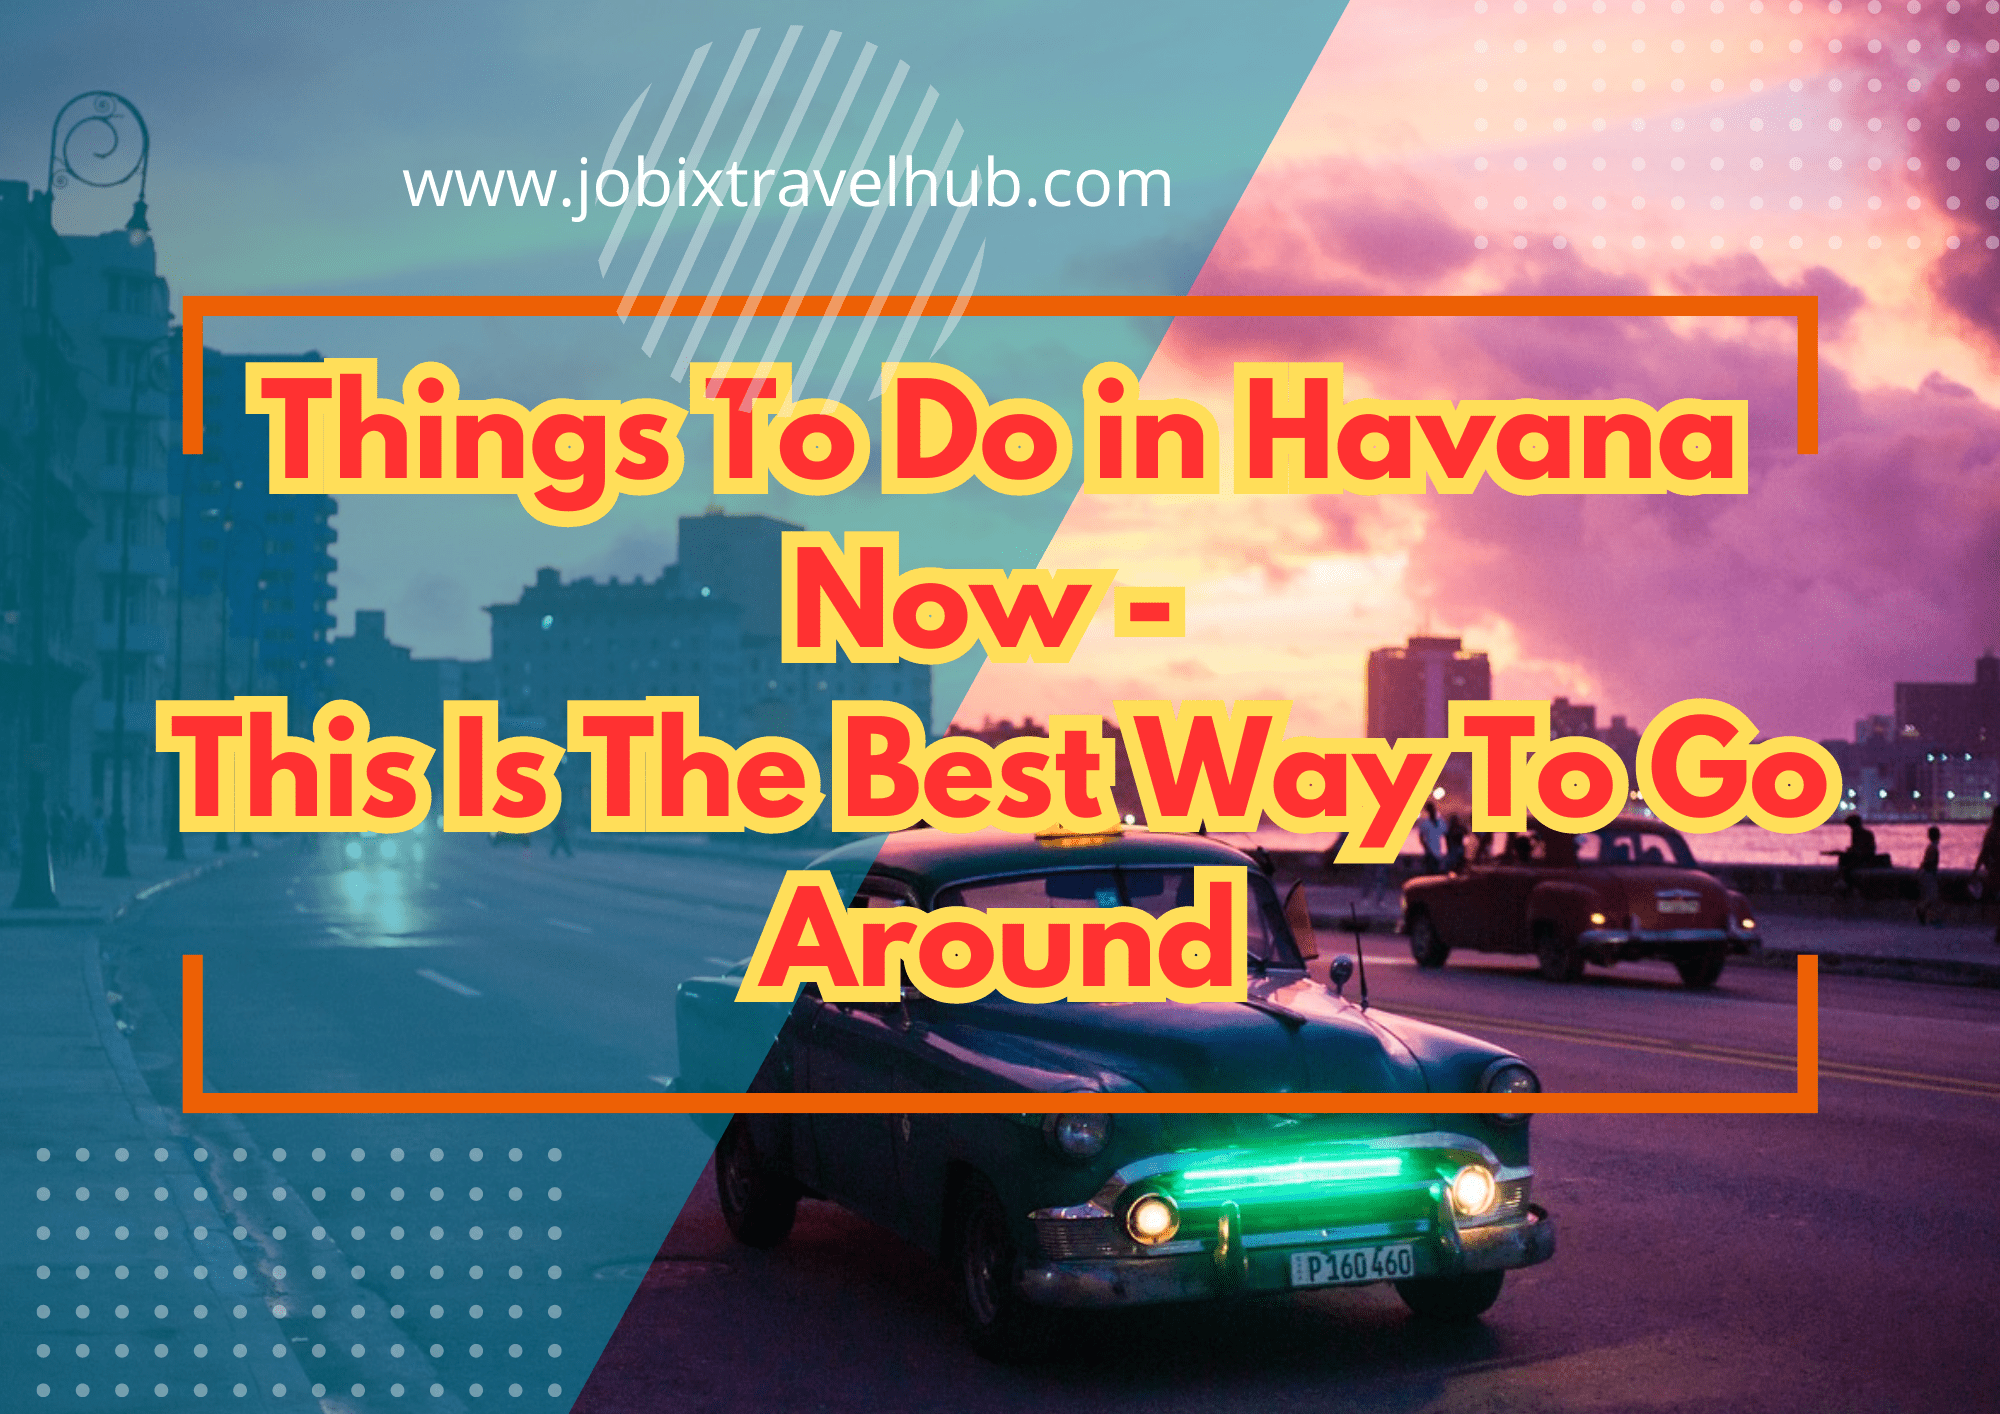 Things To Do in Havana Now - This Is The Best Way To Go Around